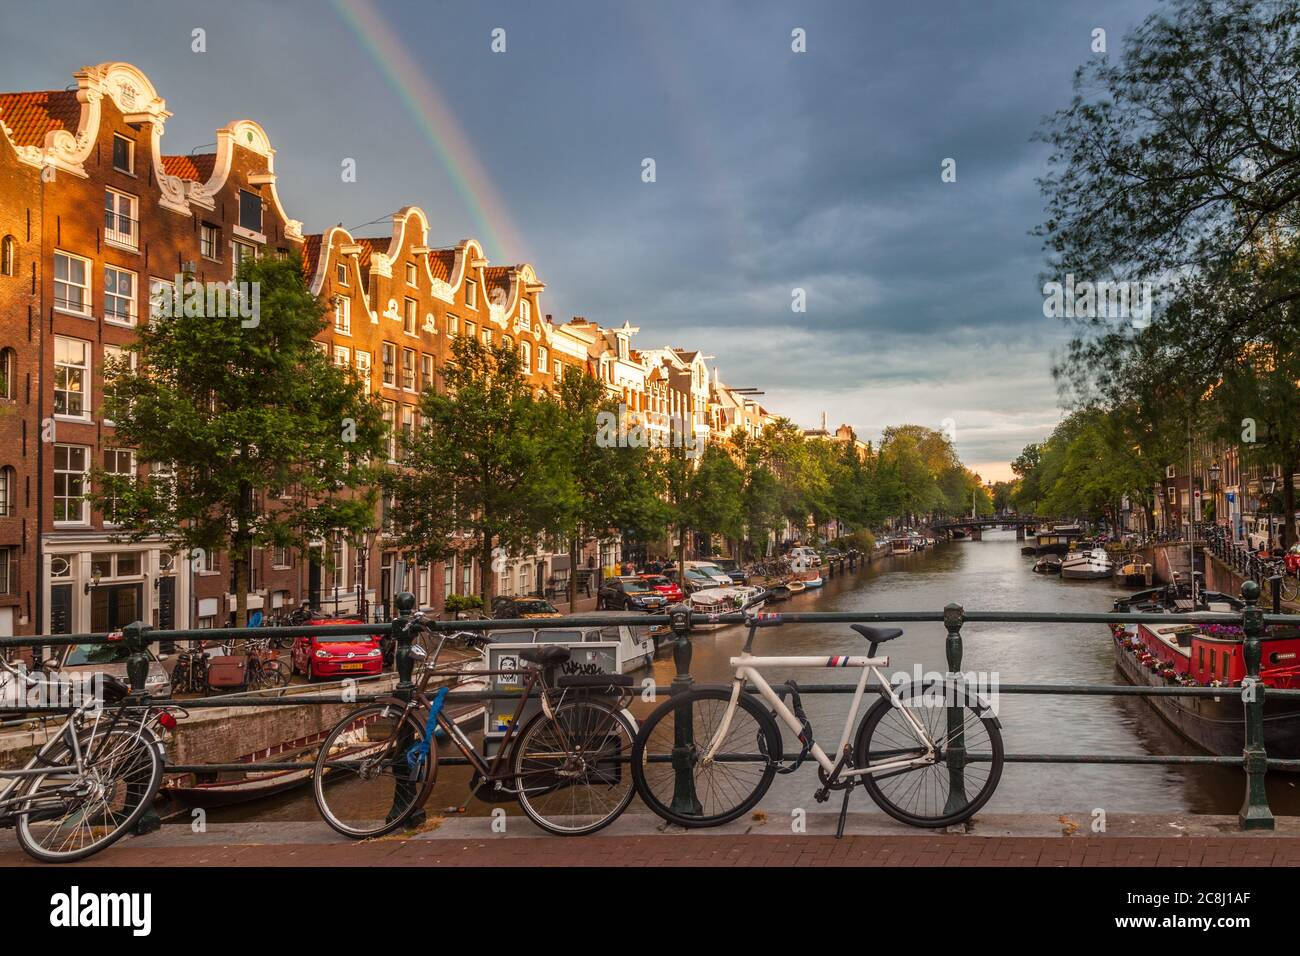 Rainbow over row houses in the Jordaan area of Amsterdam Stock Photo